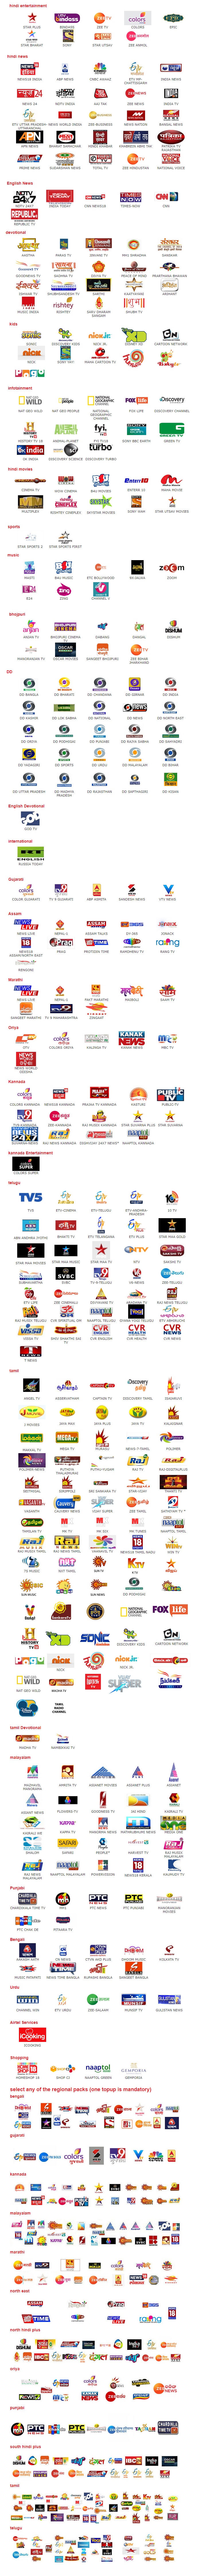 Airtel Dish tv new connection in chennai